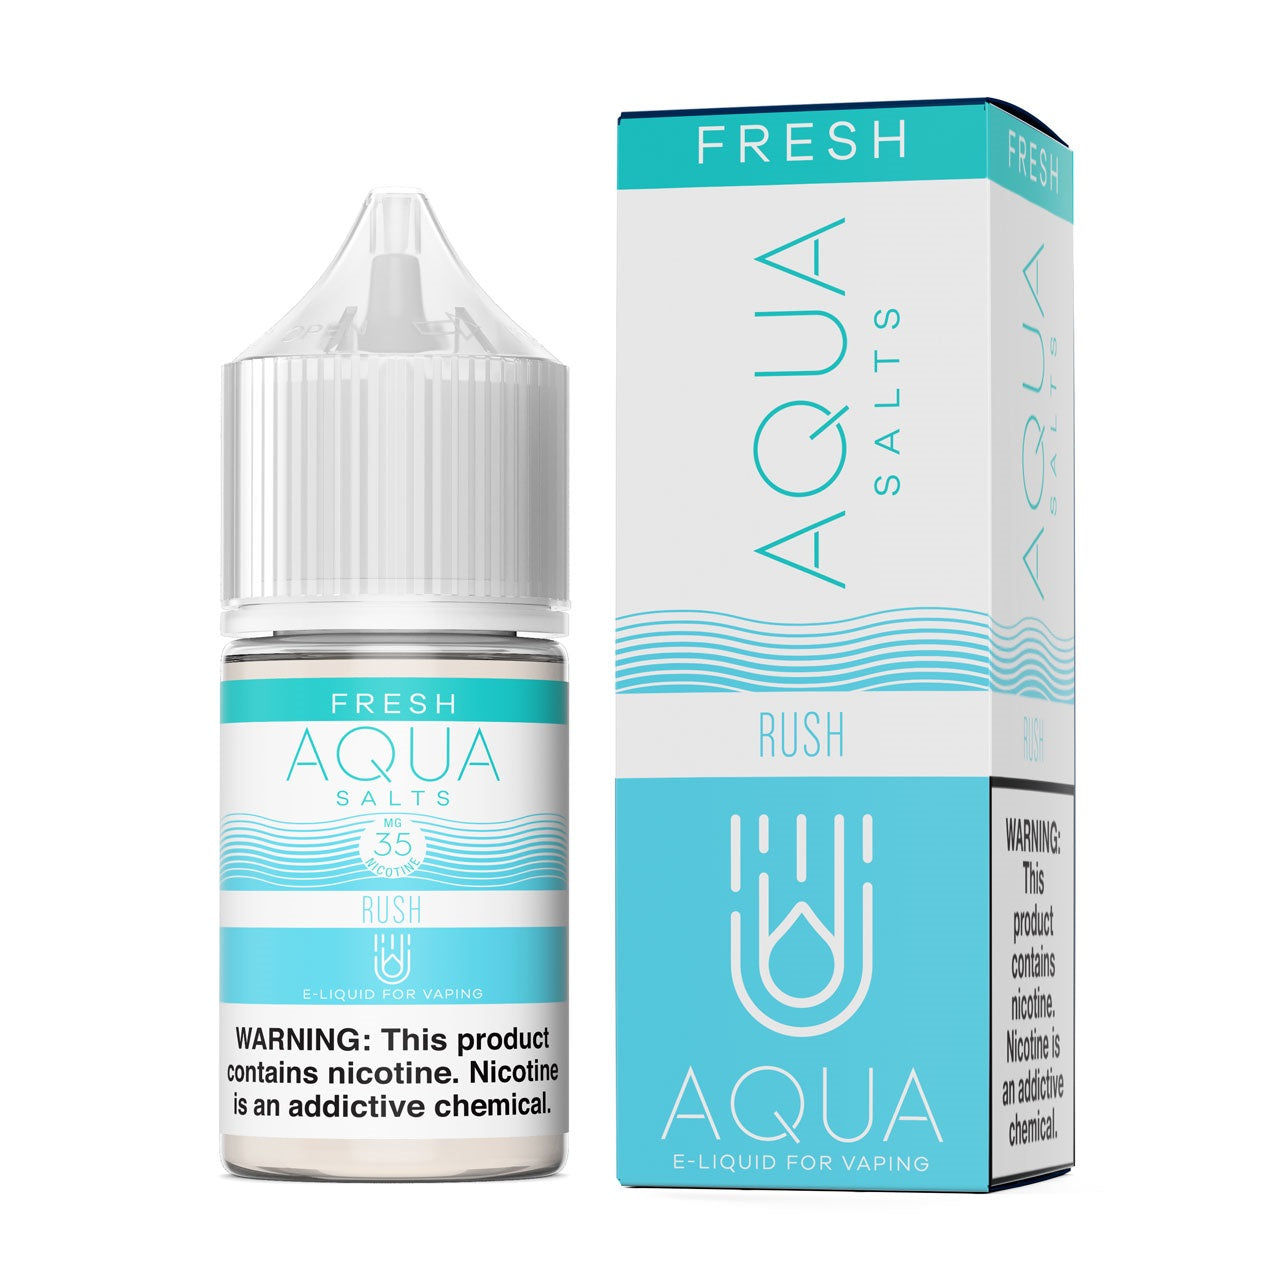 Rush by Aqua Salts Series 30mL with Packaging